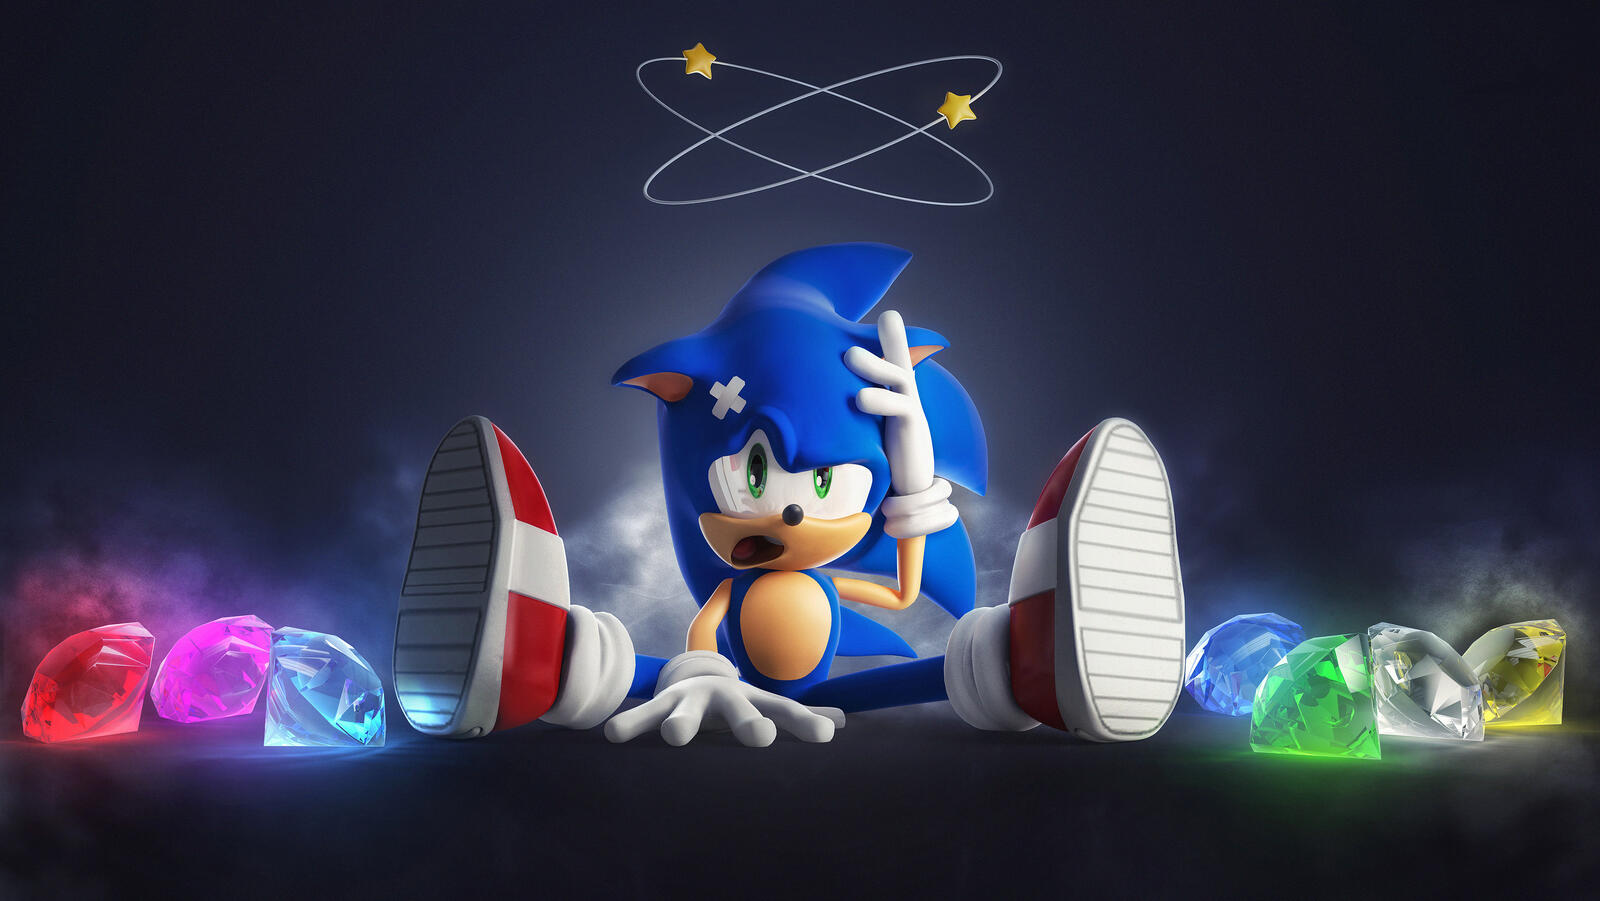 Wallpapers art Sonic The Hedgehog movies on the desktop